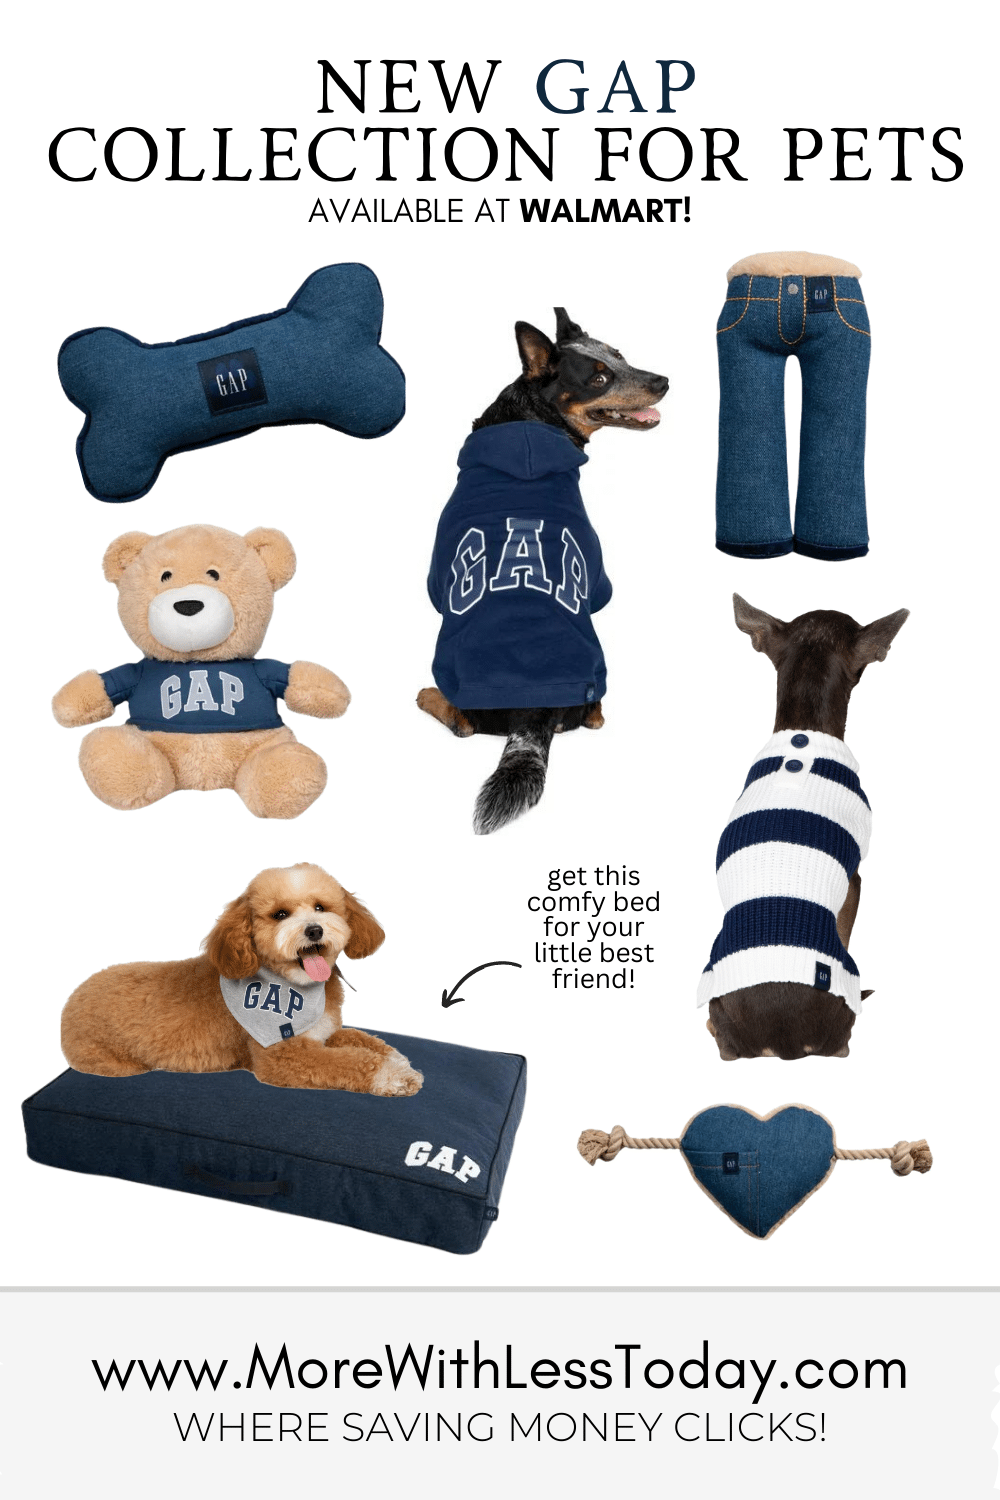 Walmart Pet Products – Exclusive New GAP Collection - PIN